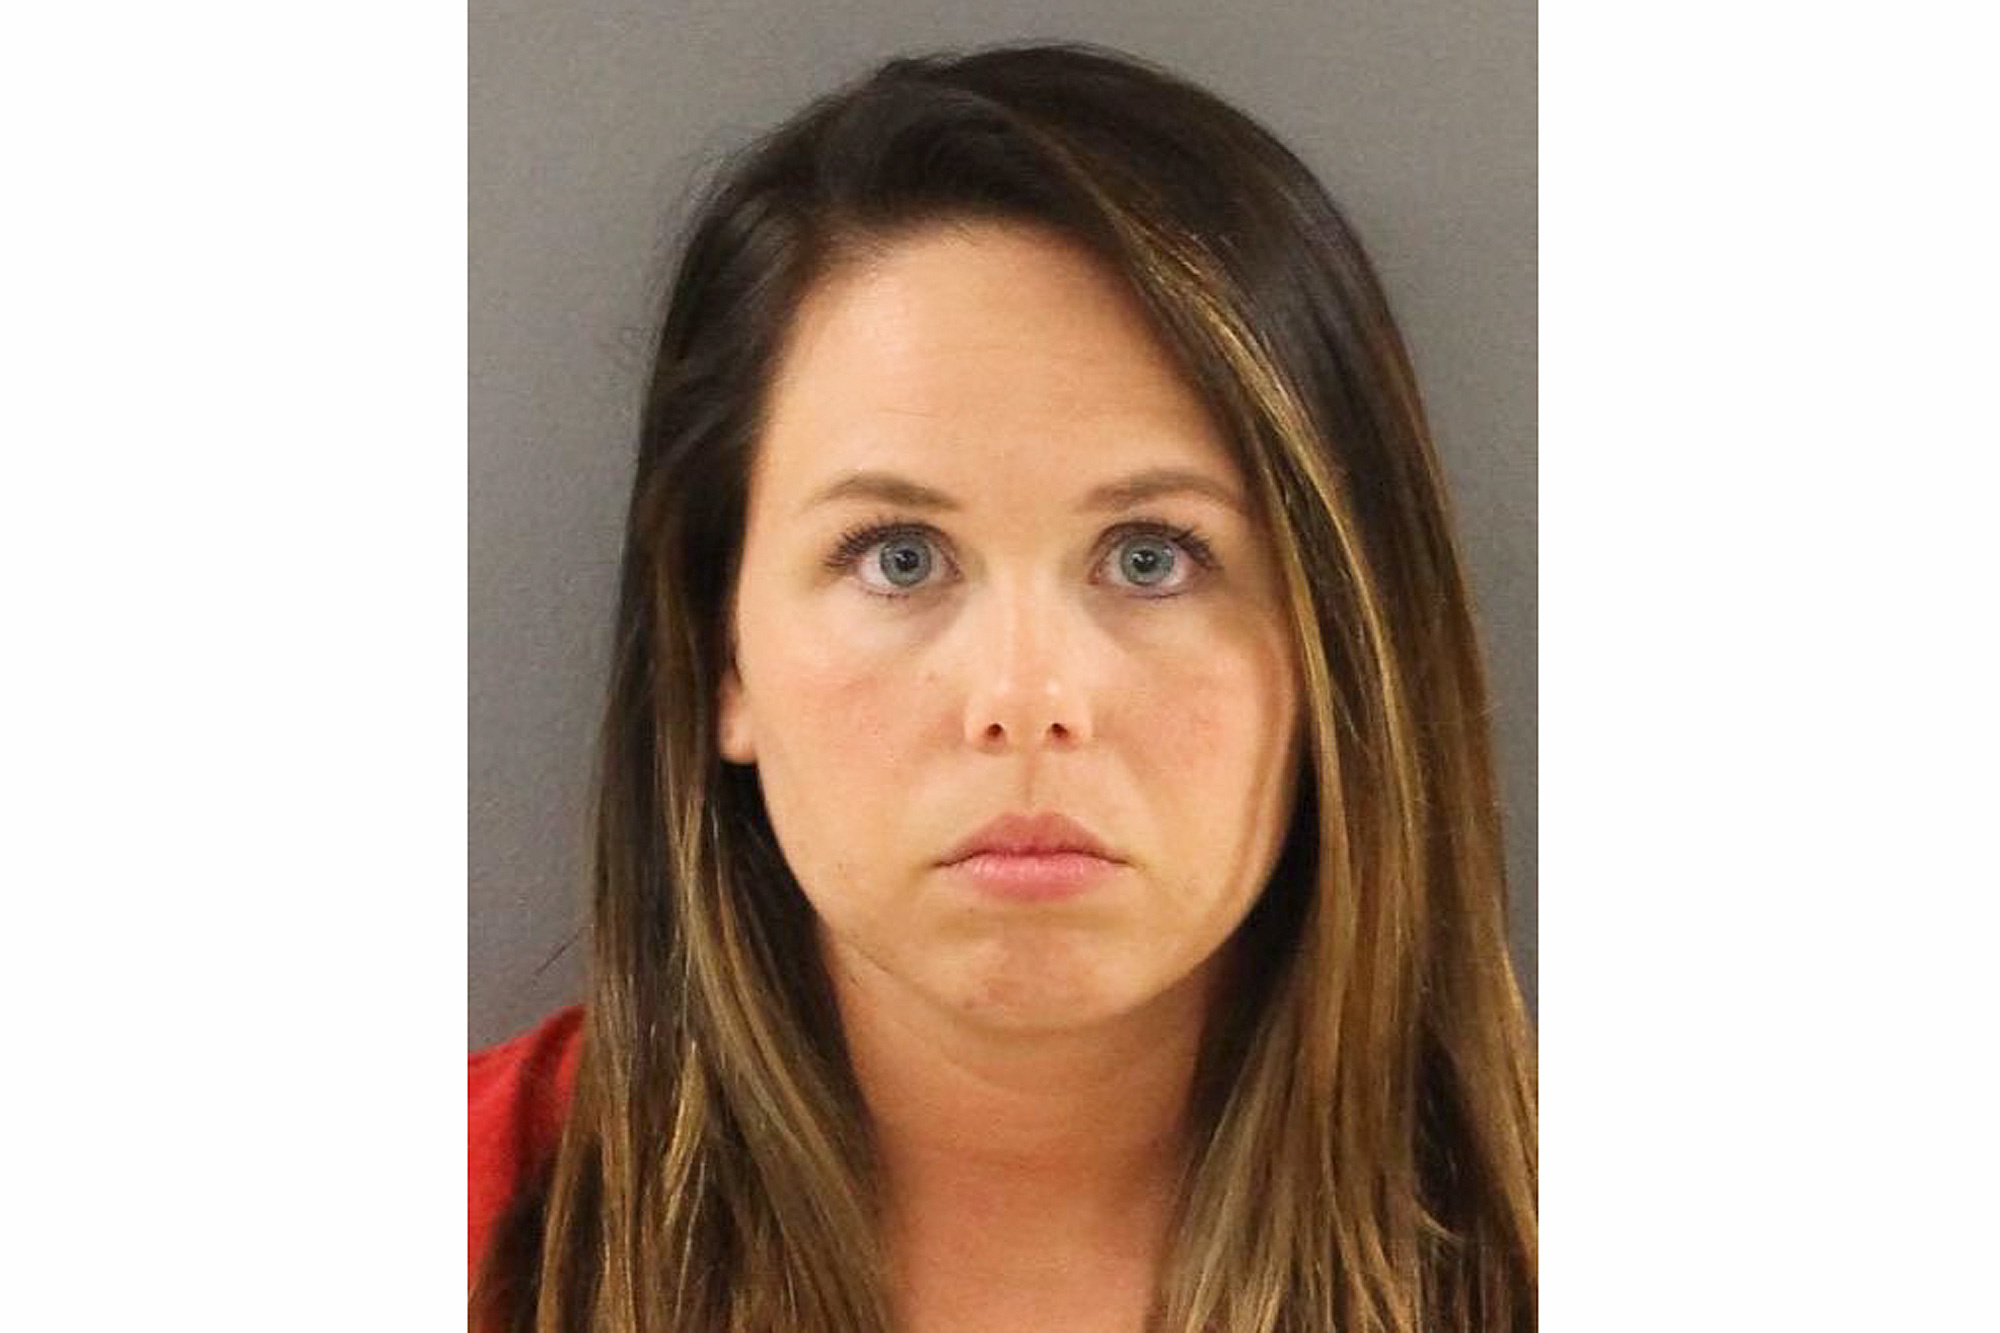 HS Football Coachs Wife Faces Prison After Being Caught Having Sex With One Of His Players pic